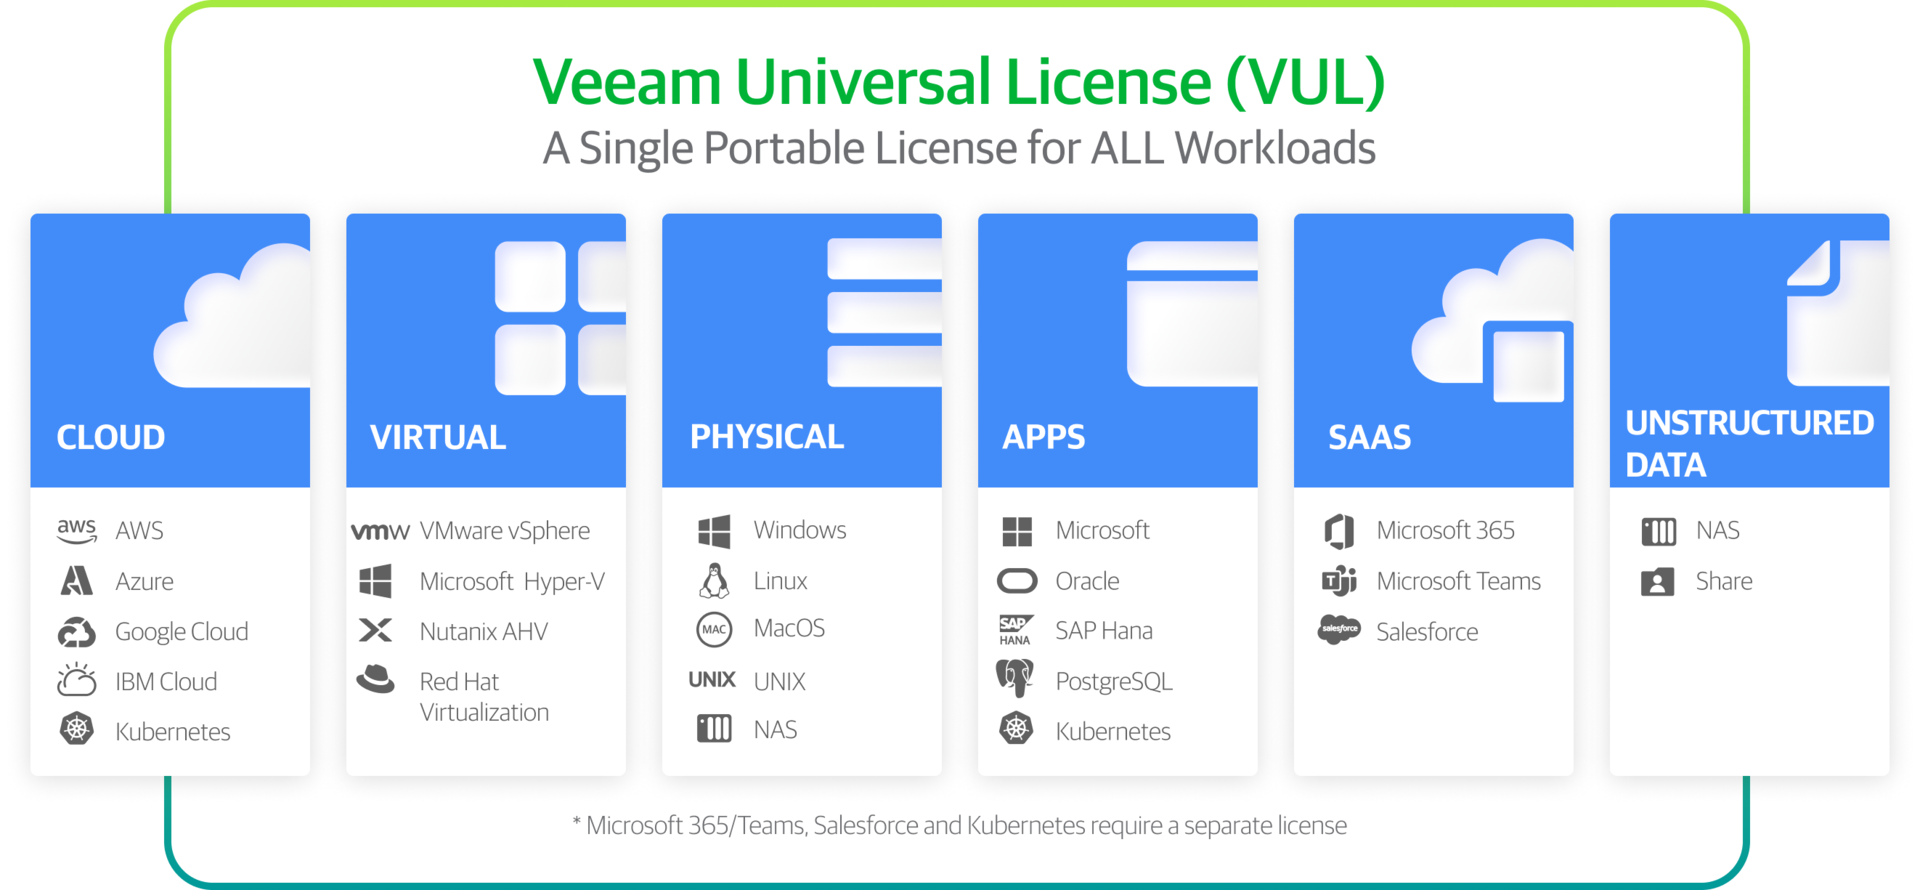 a-single-portable-license-for-all-workloads